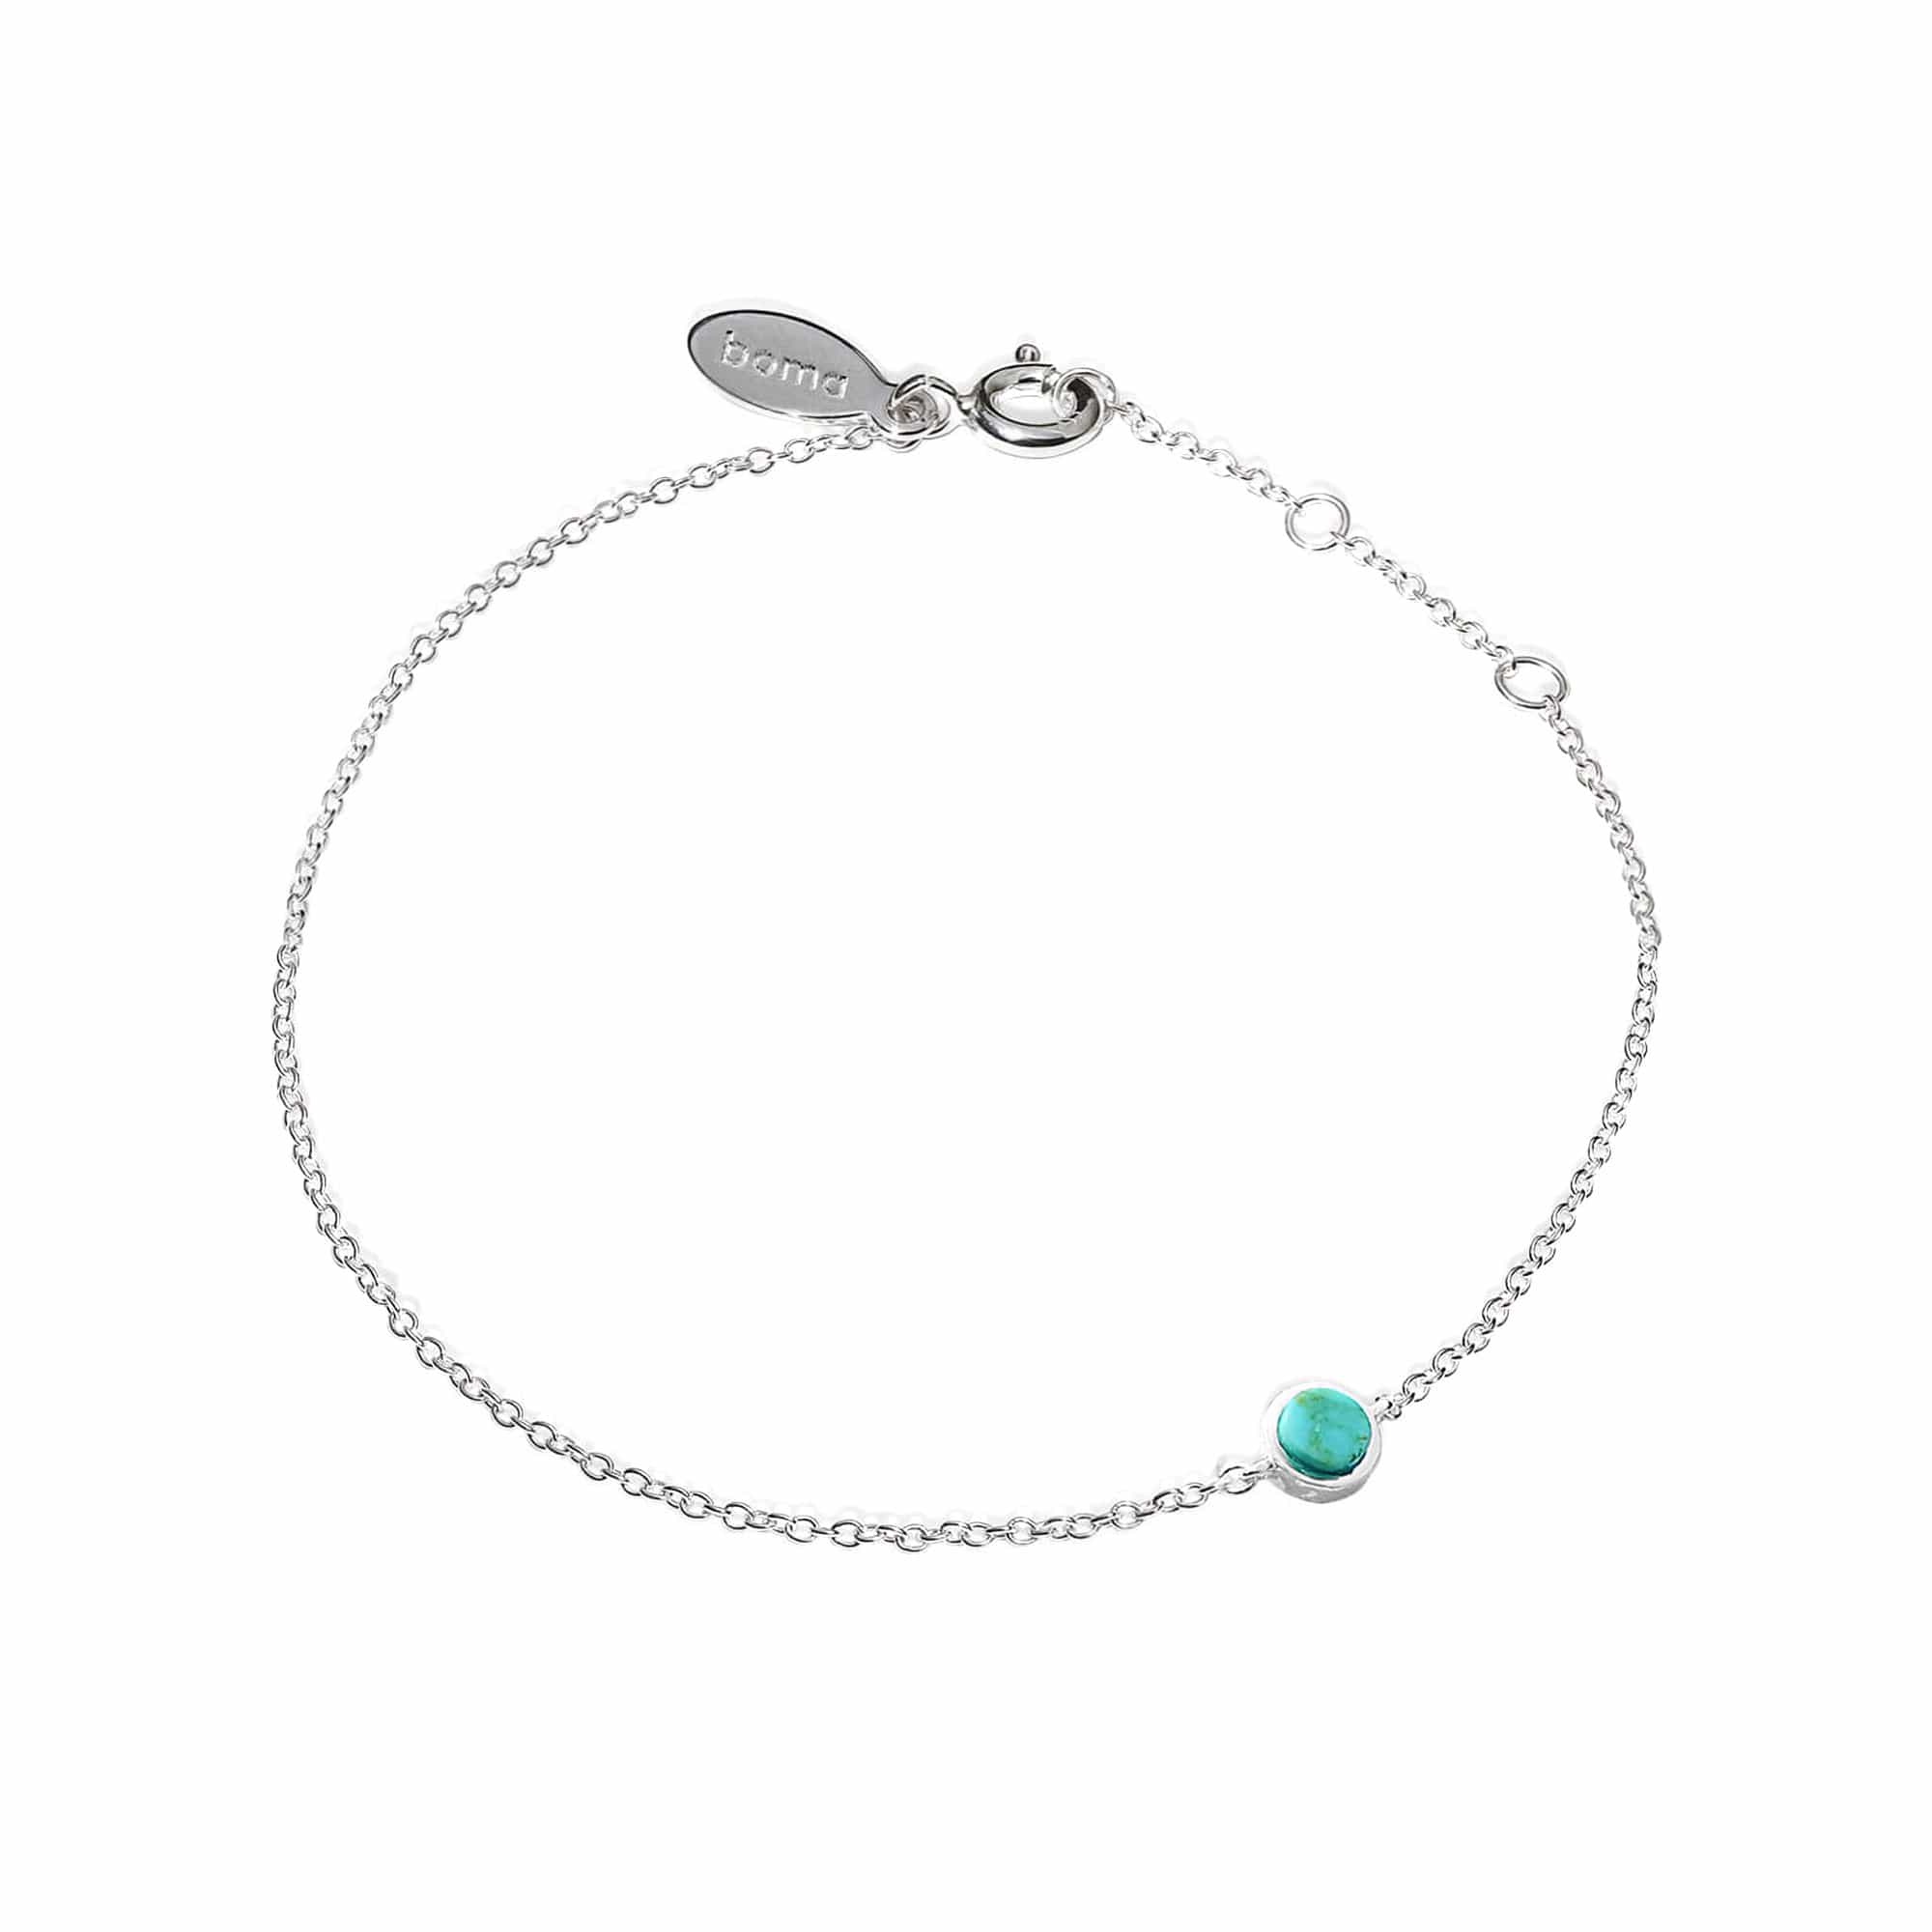 Boma Jewelry Bracelets Sterling Silver with Turquoise Belle Dot Bracelet